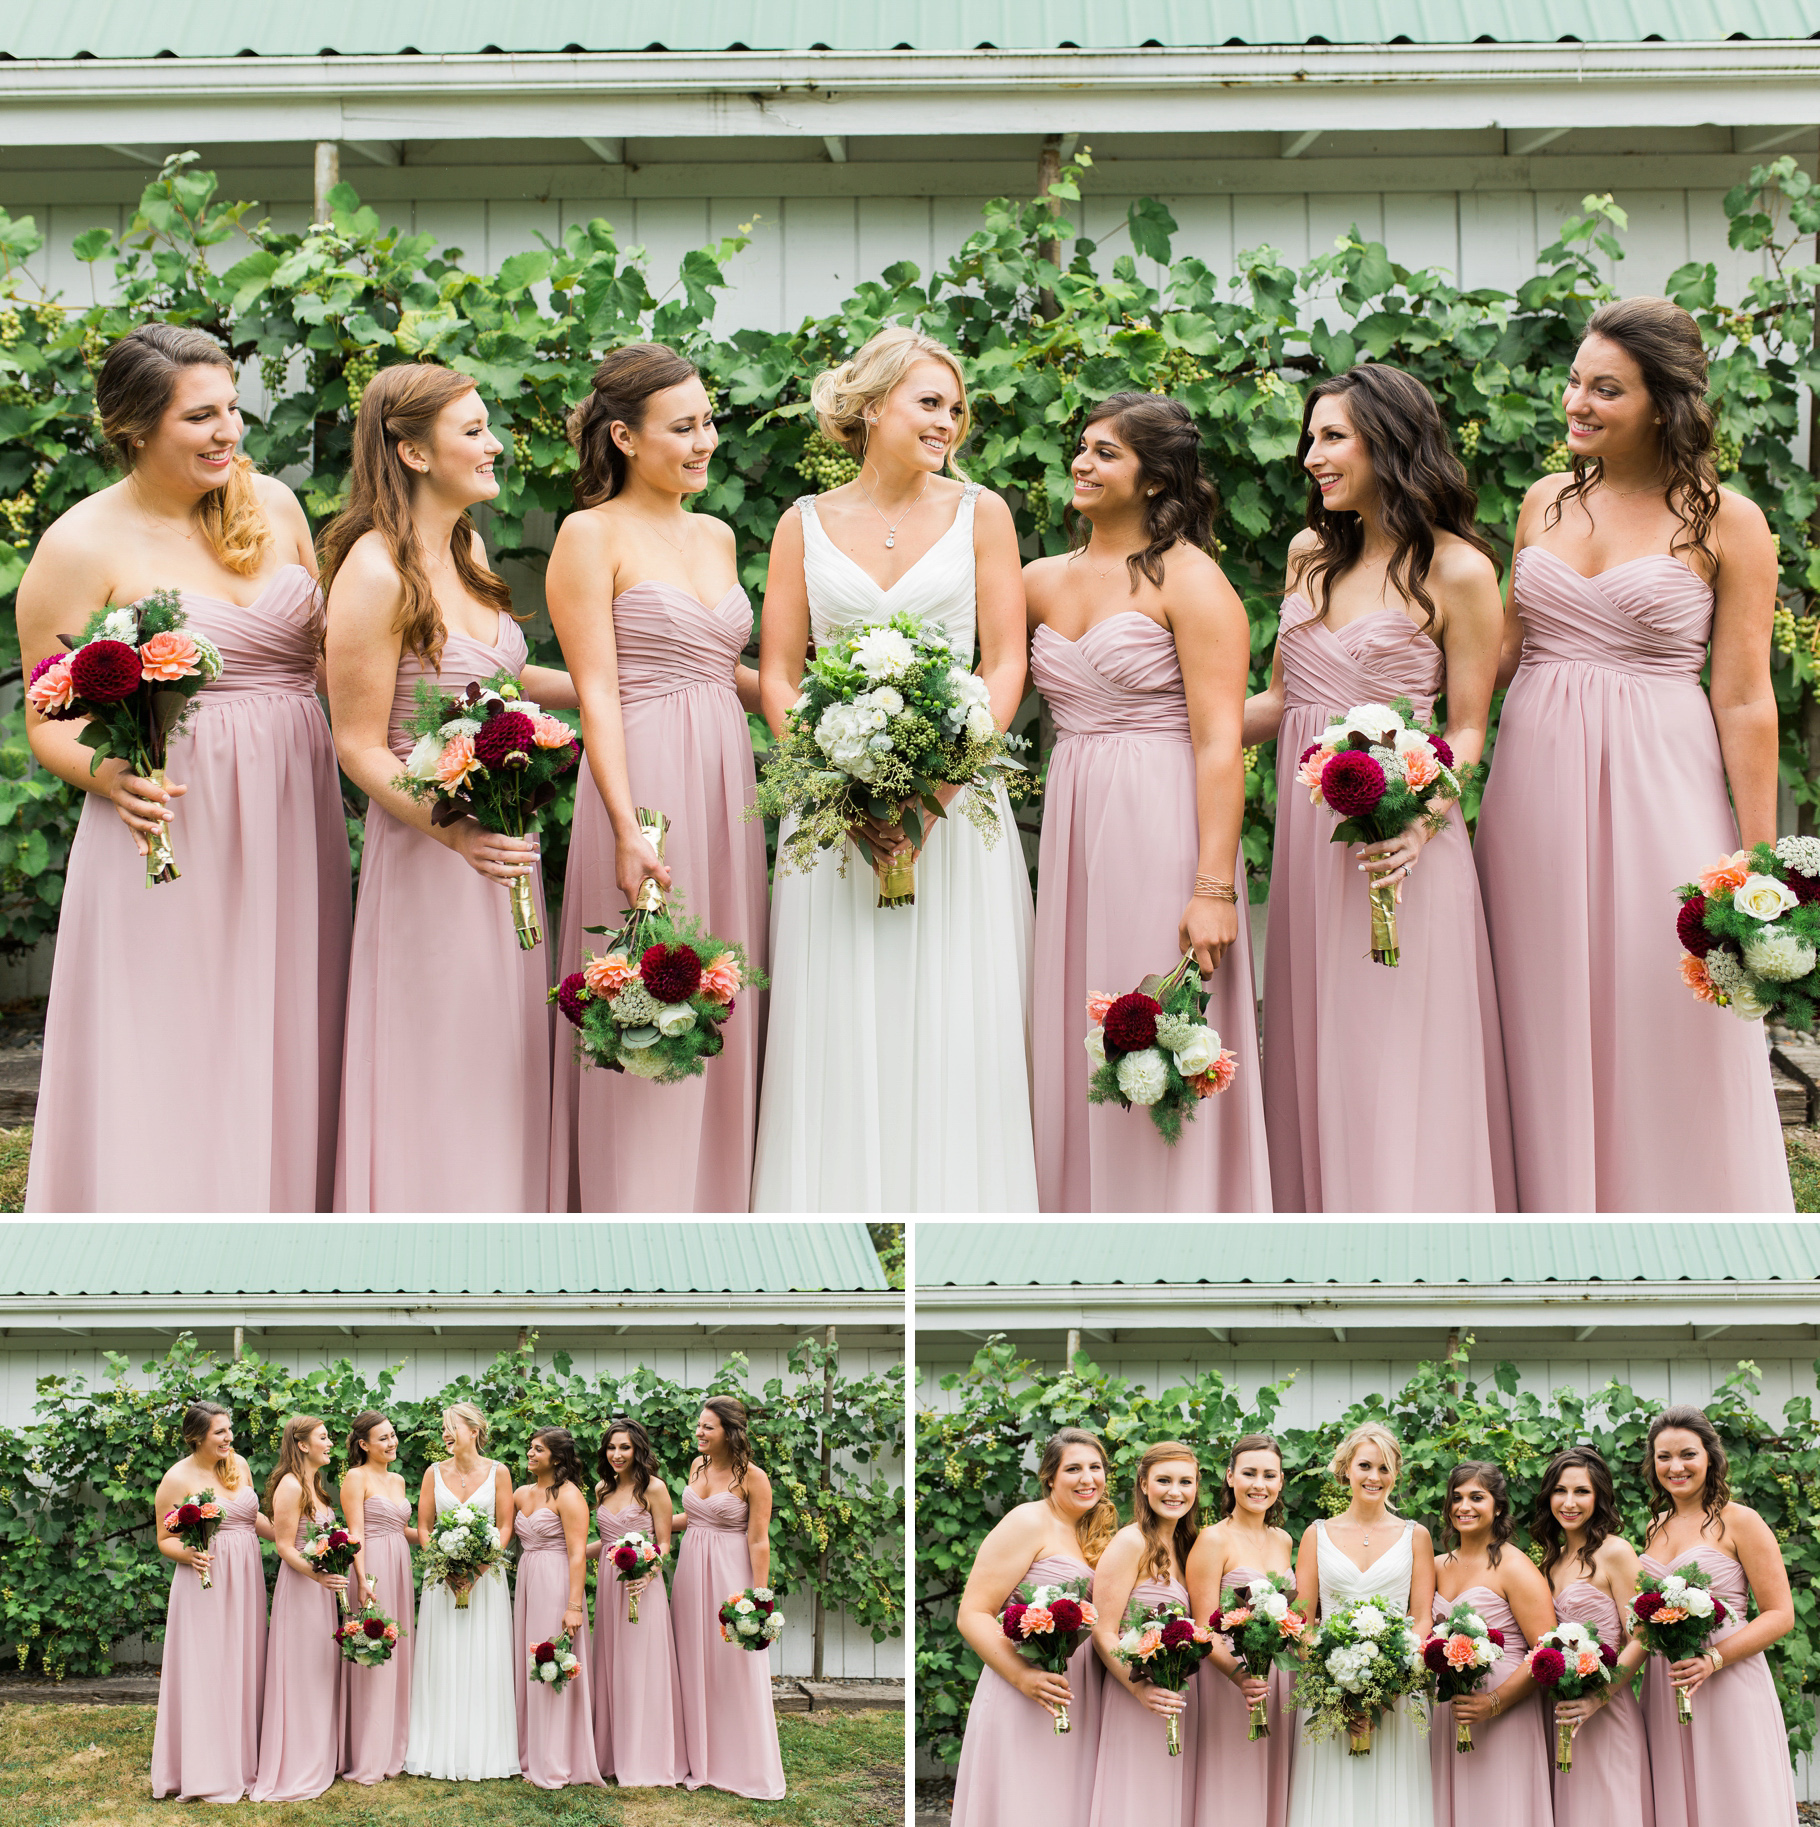 18-Delille-Cellars-Chateau-Vineyard-Bride-Bridesmaids-Wedding-Photography-by-Betty-Elaine-Woodinville-Winery-Seattle-Photographer